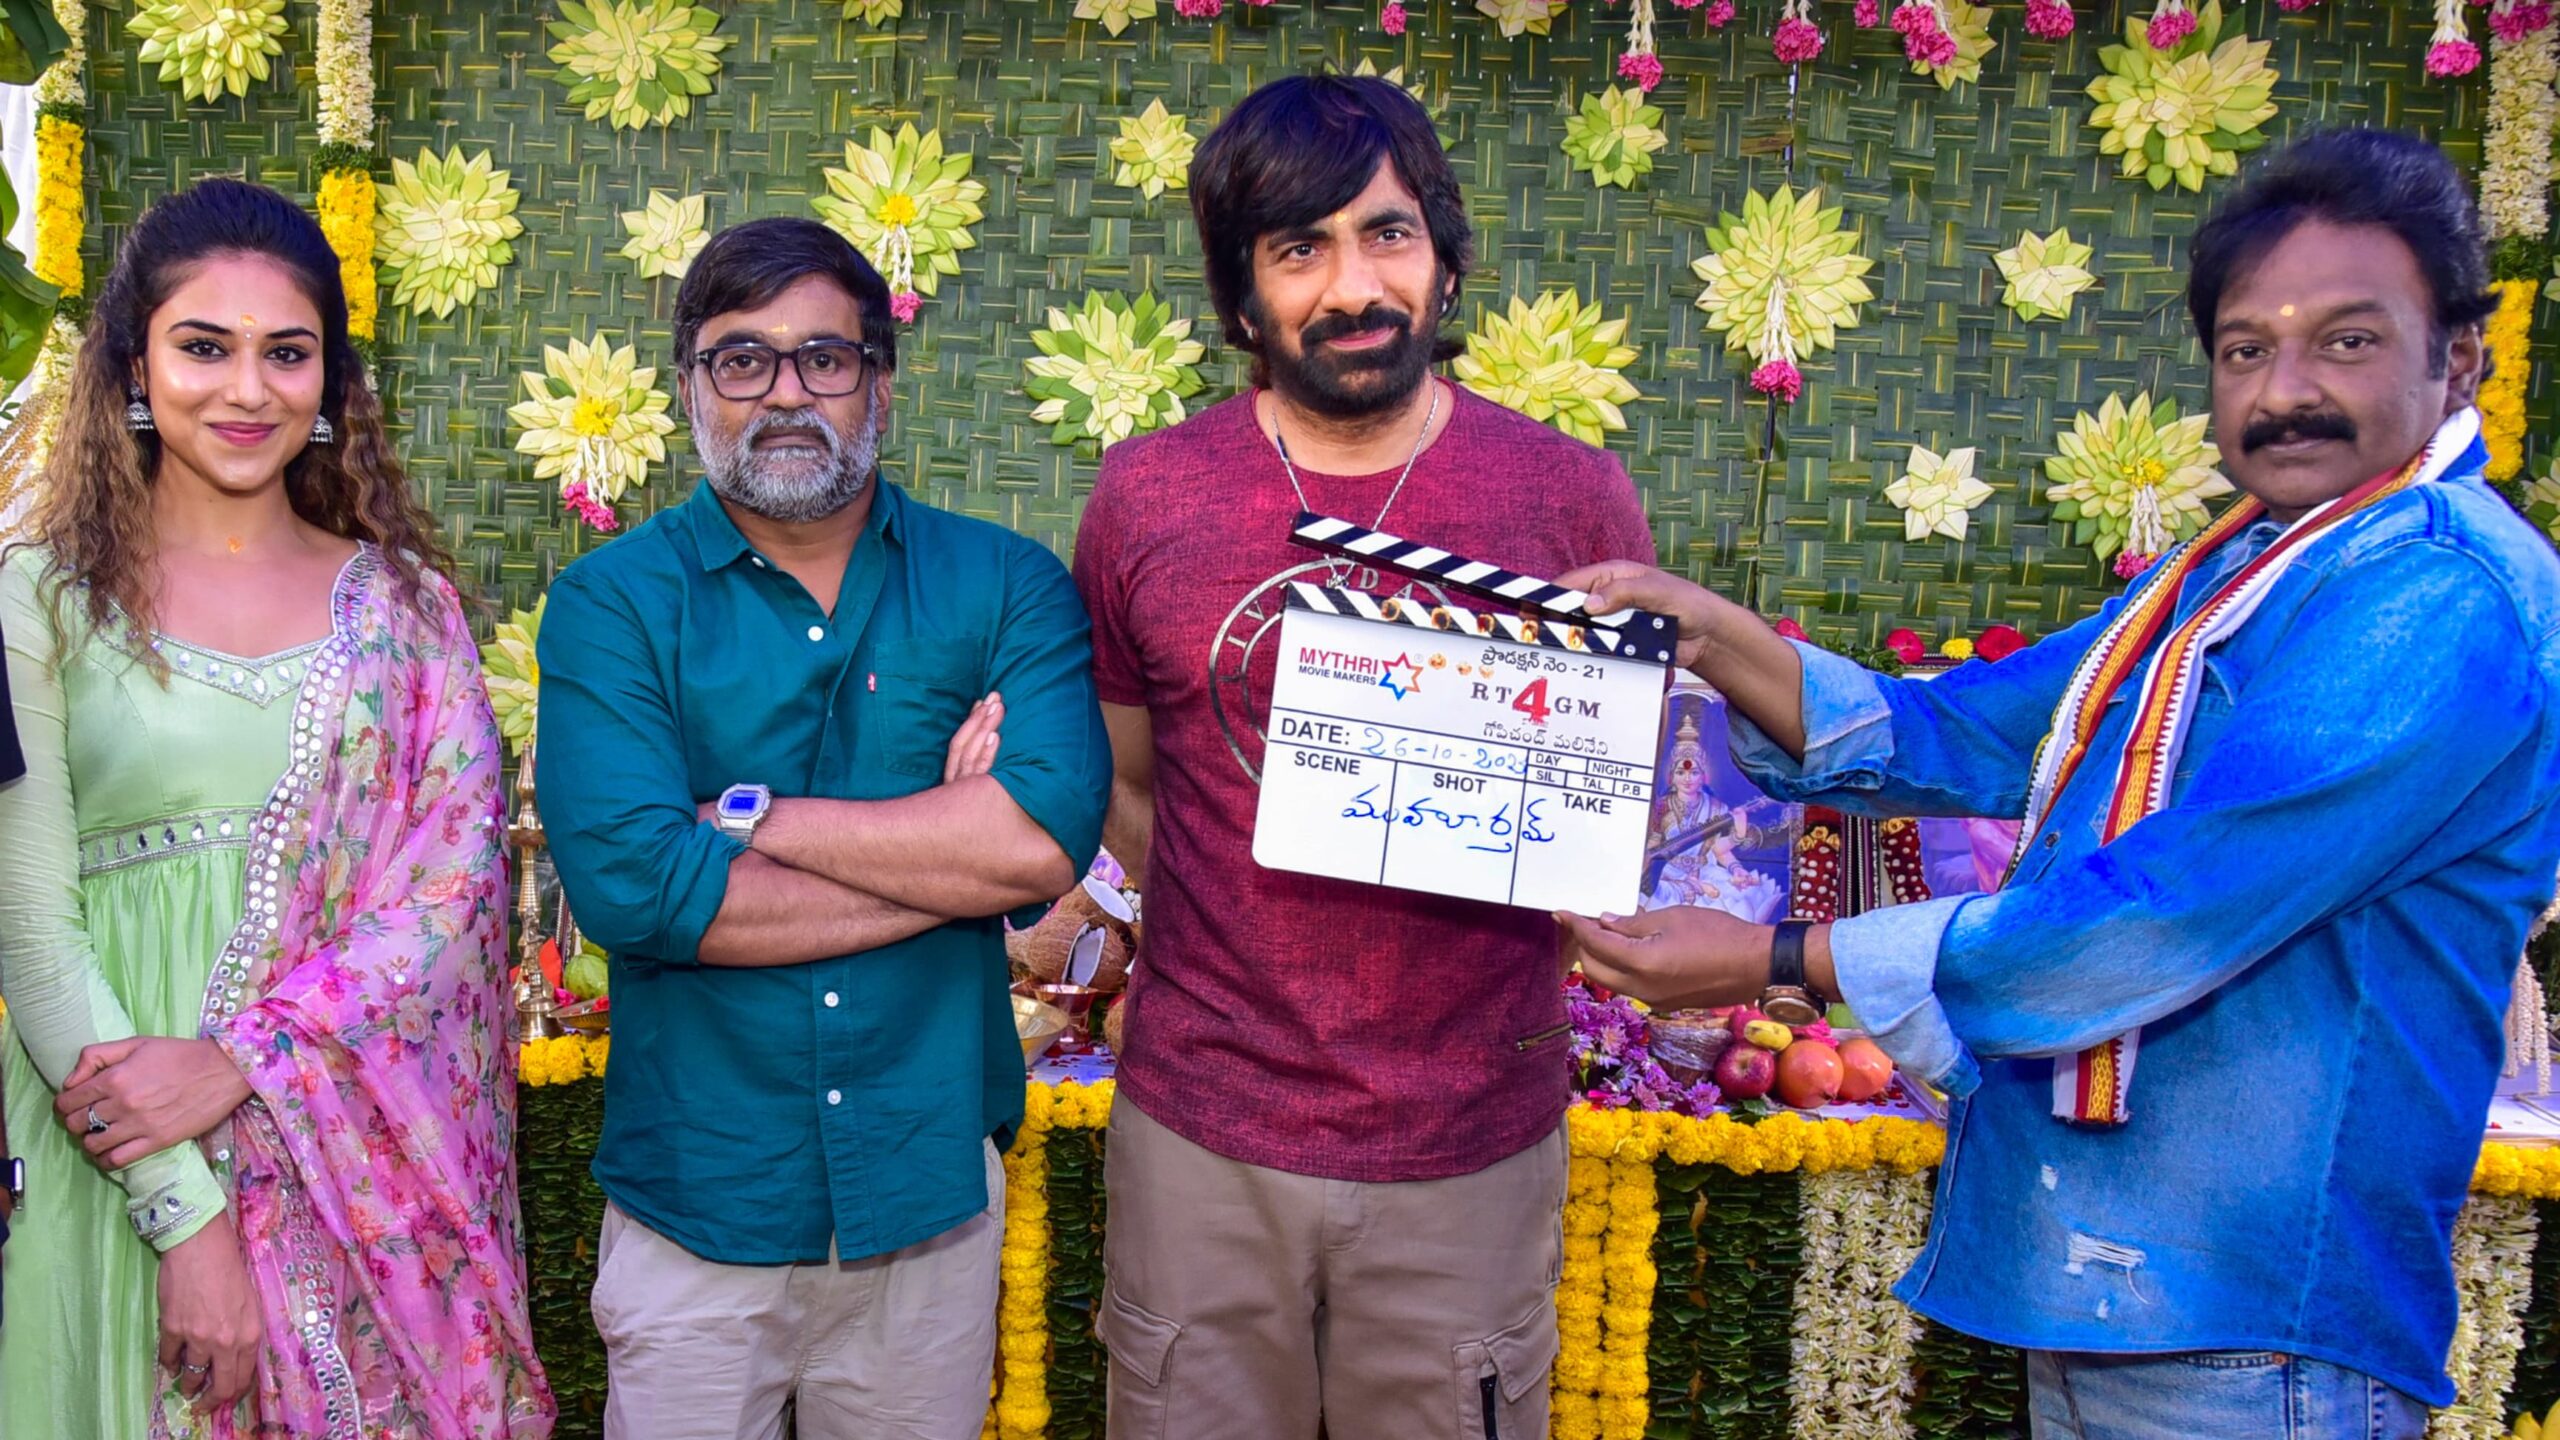 Mass Maharaja Ravi Teja, Gopichandh Malineni, S Thaman, Mythri Movie Makers’ #RT4GM Launched In A Grand Manner